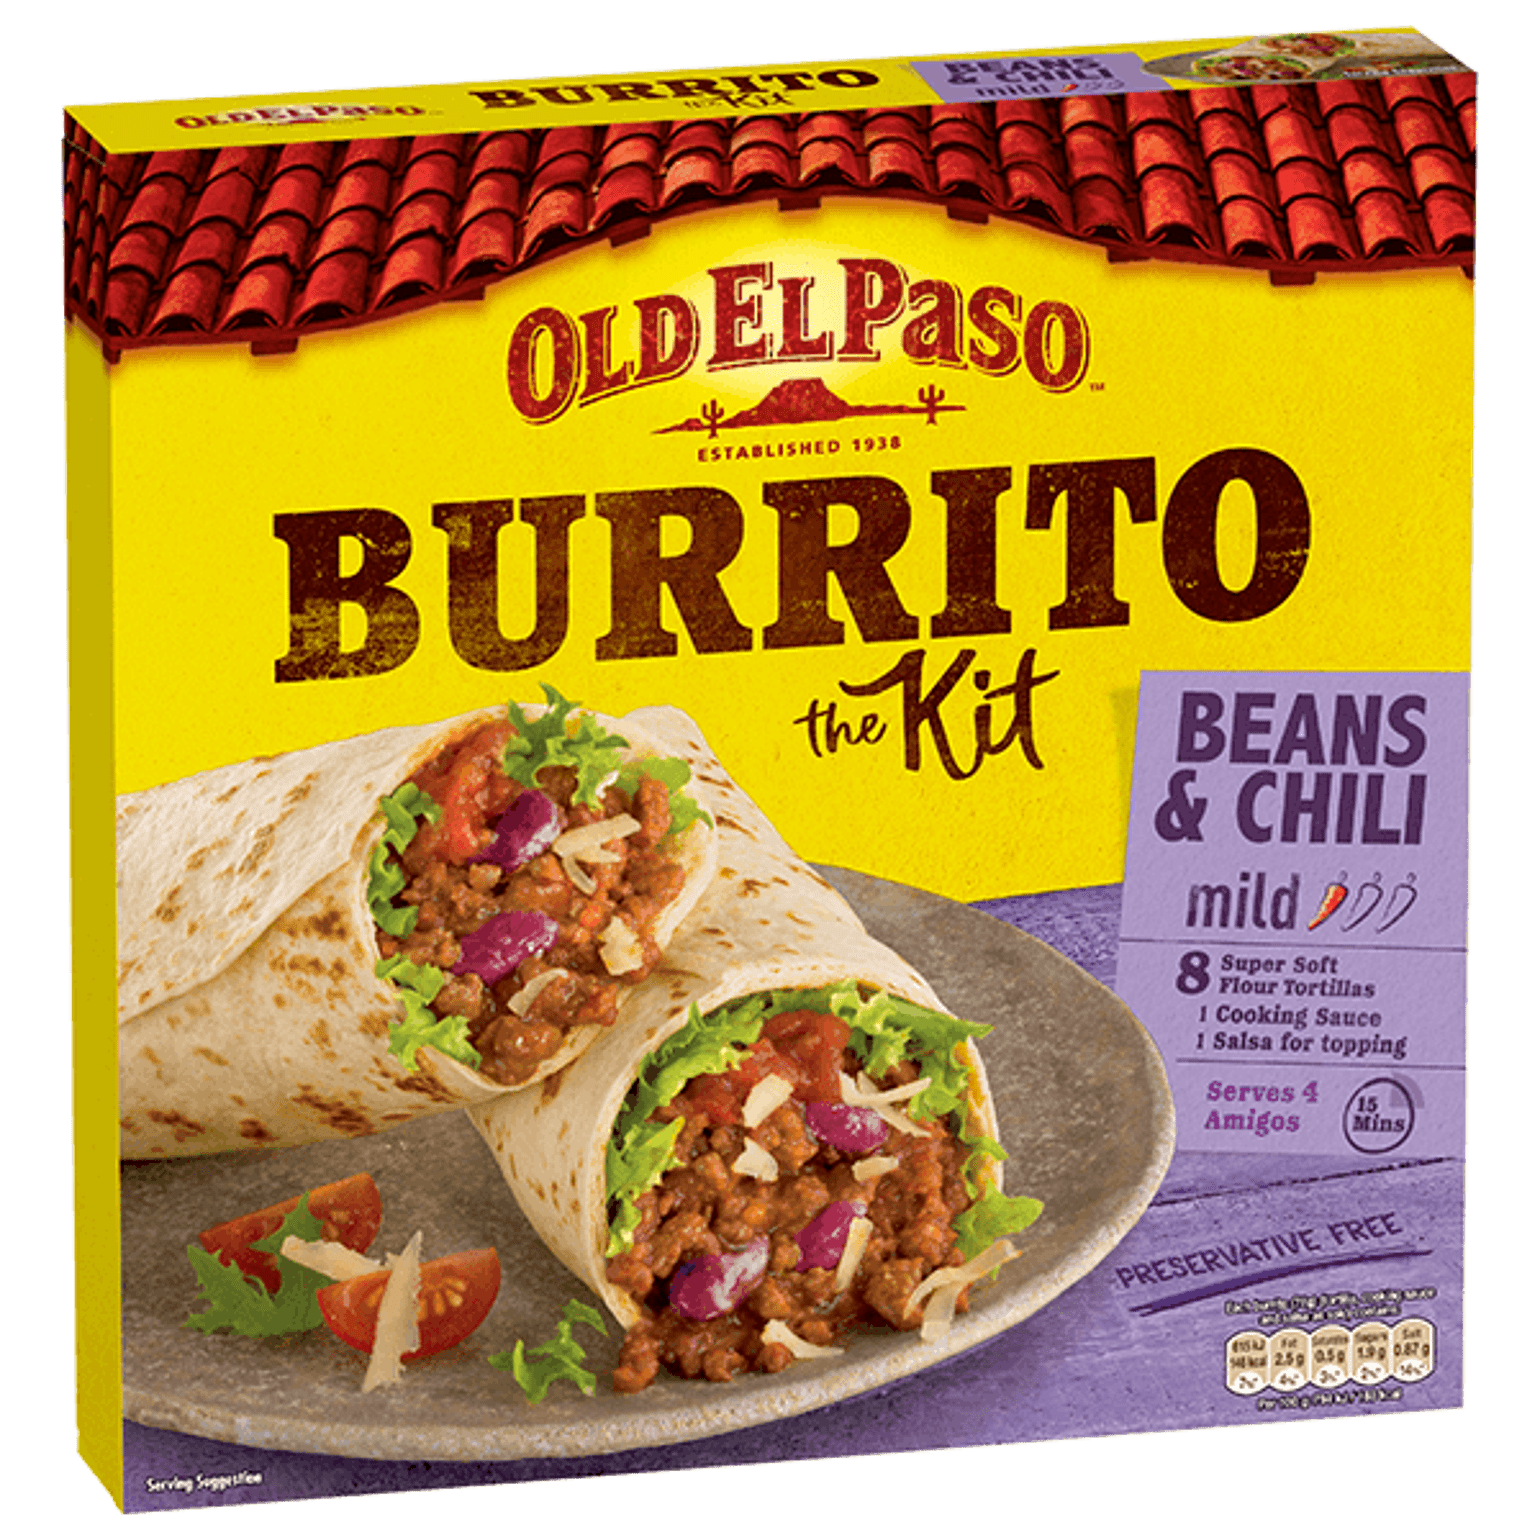 pack of Old El Paso's beans & chili mild burrito kit containing soft flour tortillas, cooking sauce & salsa (620g)